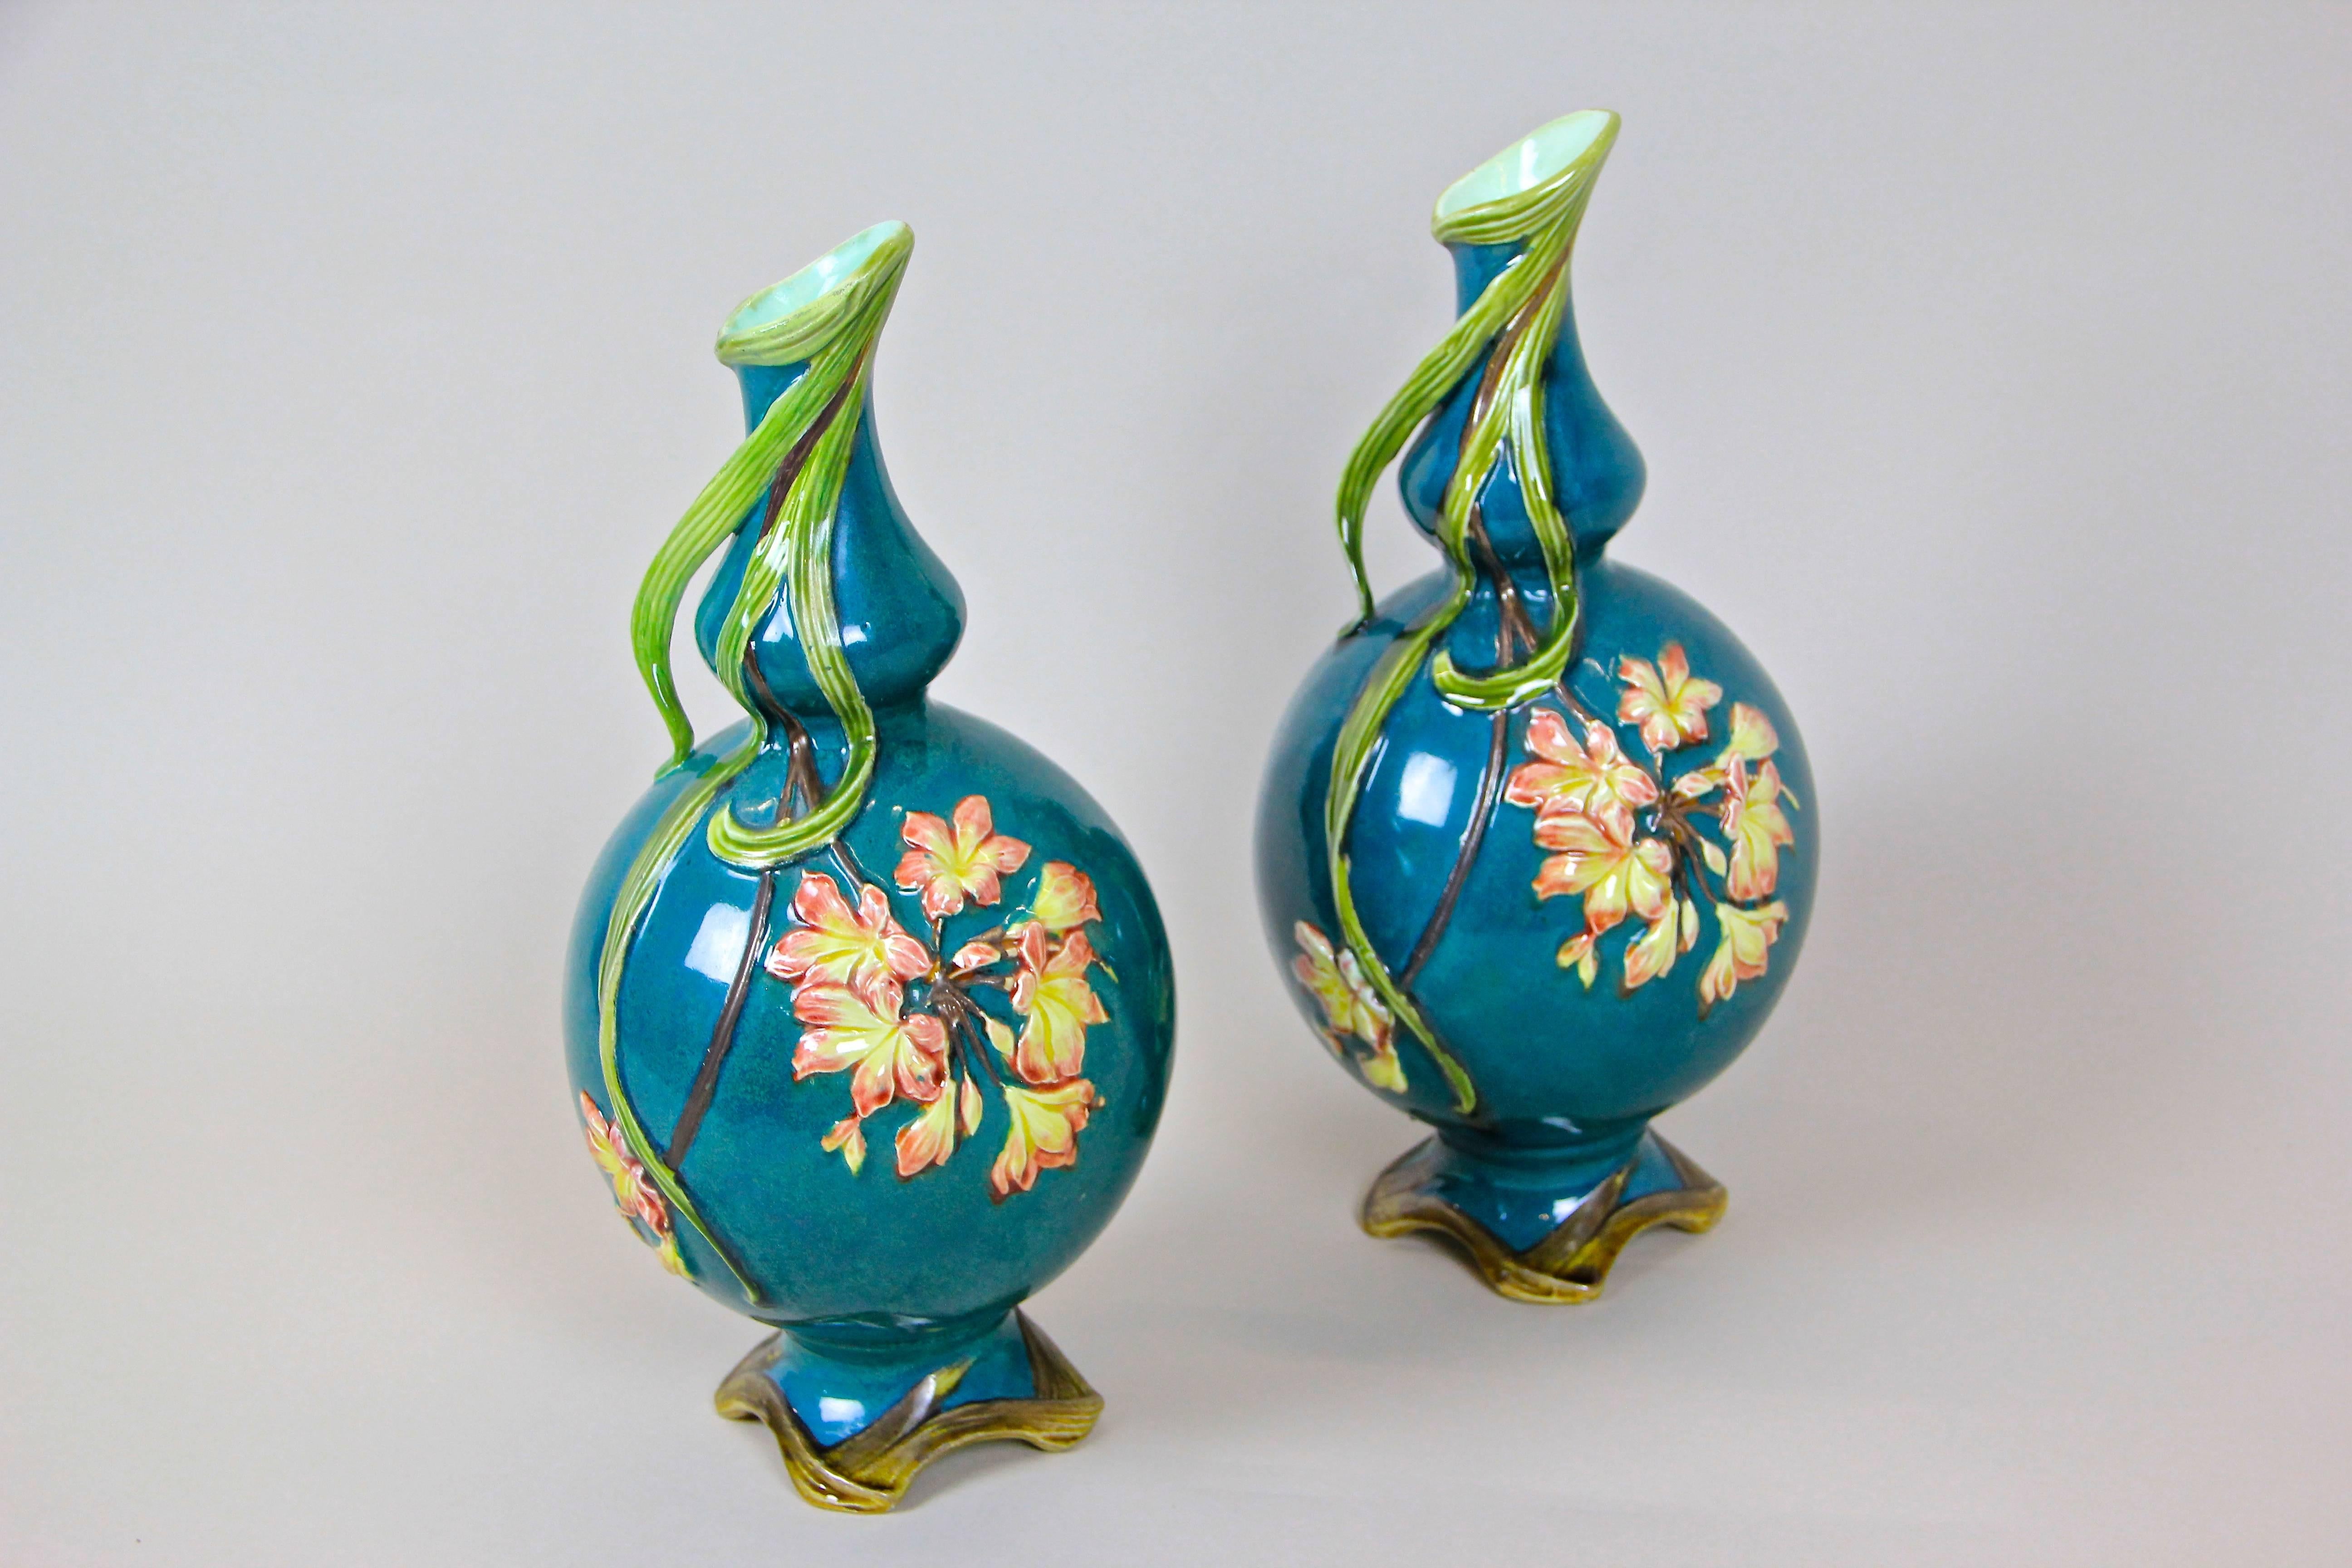 Coming from France circa 1910 we present to you this outstanding pair of beautiful designed Art Nouveau vases. The great floral design combined with an unique hand-painted coloring makes this pair a super decorative combo. Pretty flowers in light